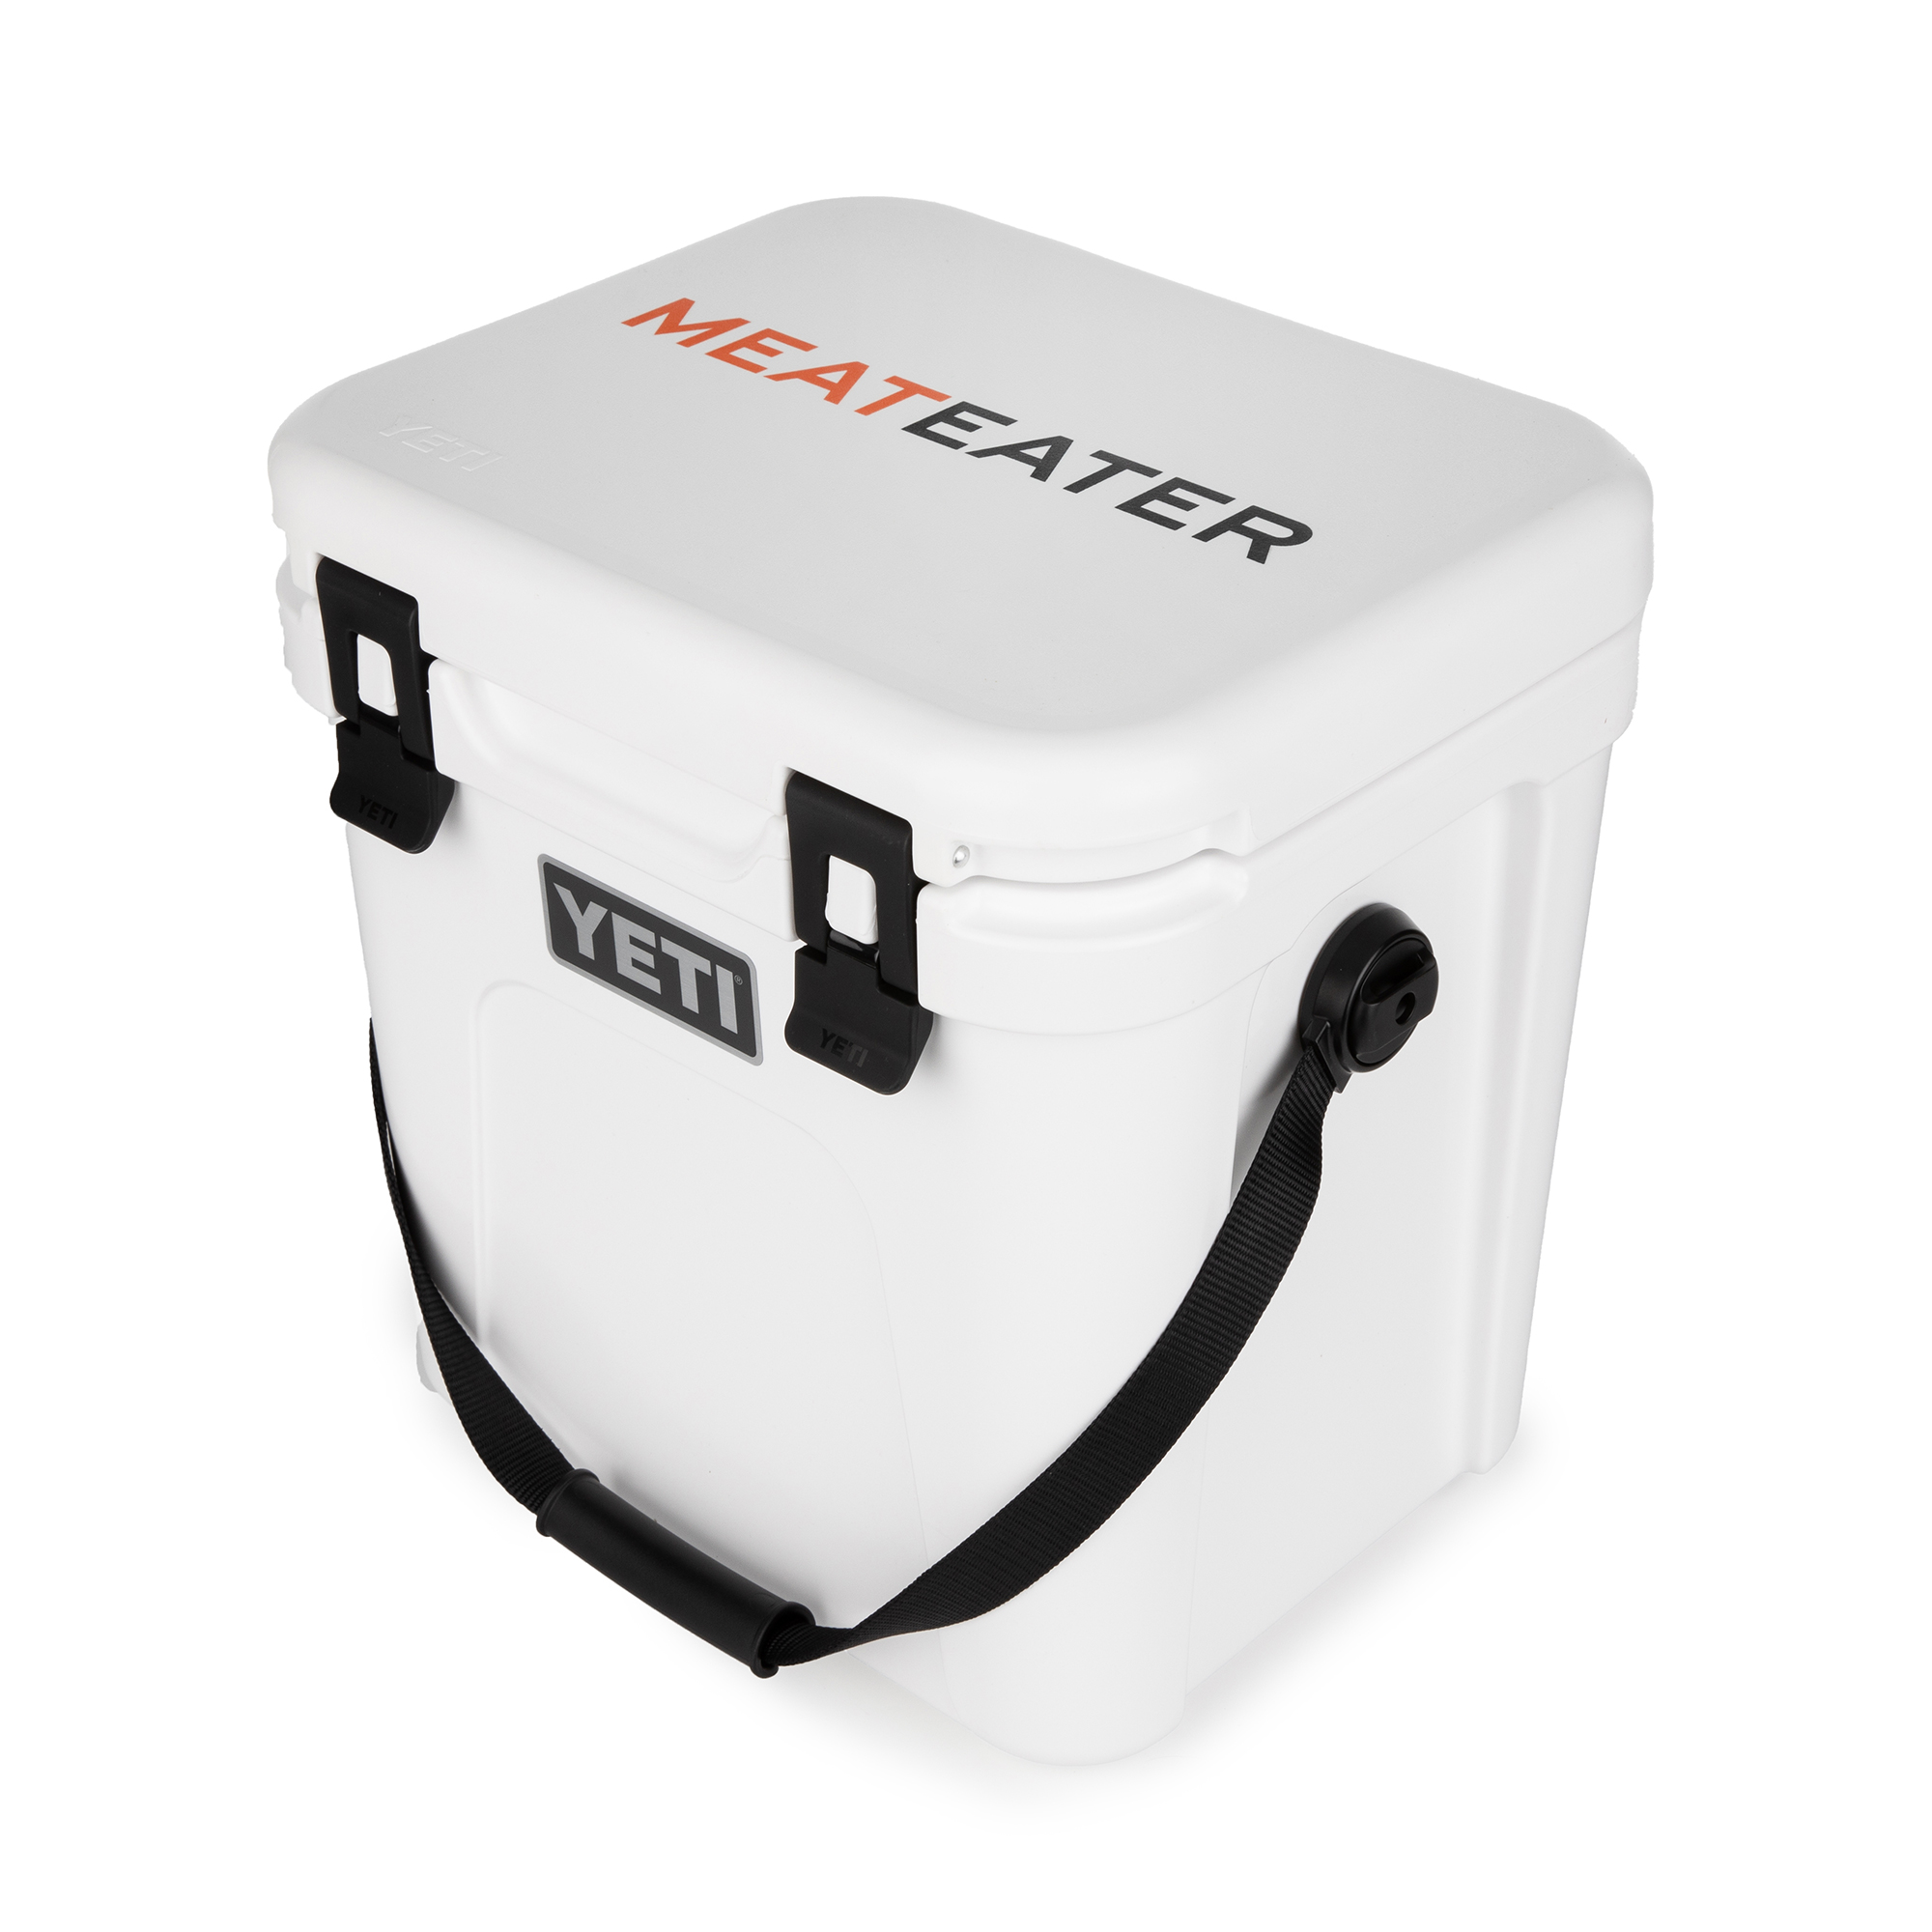 https://store.themeateater.com/on/demandware.static/-/Sites-meateater-master/default/dw87f4d192/meateater-branded-yeti-roadie-24/meateater-branded-yeti-roadie-24_color_white_2.jpg